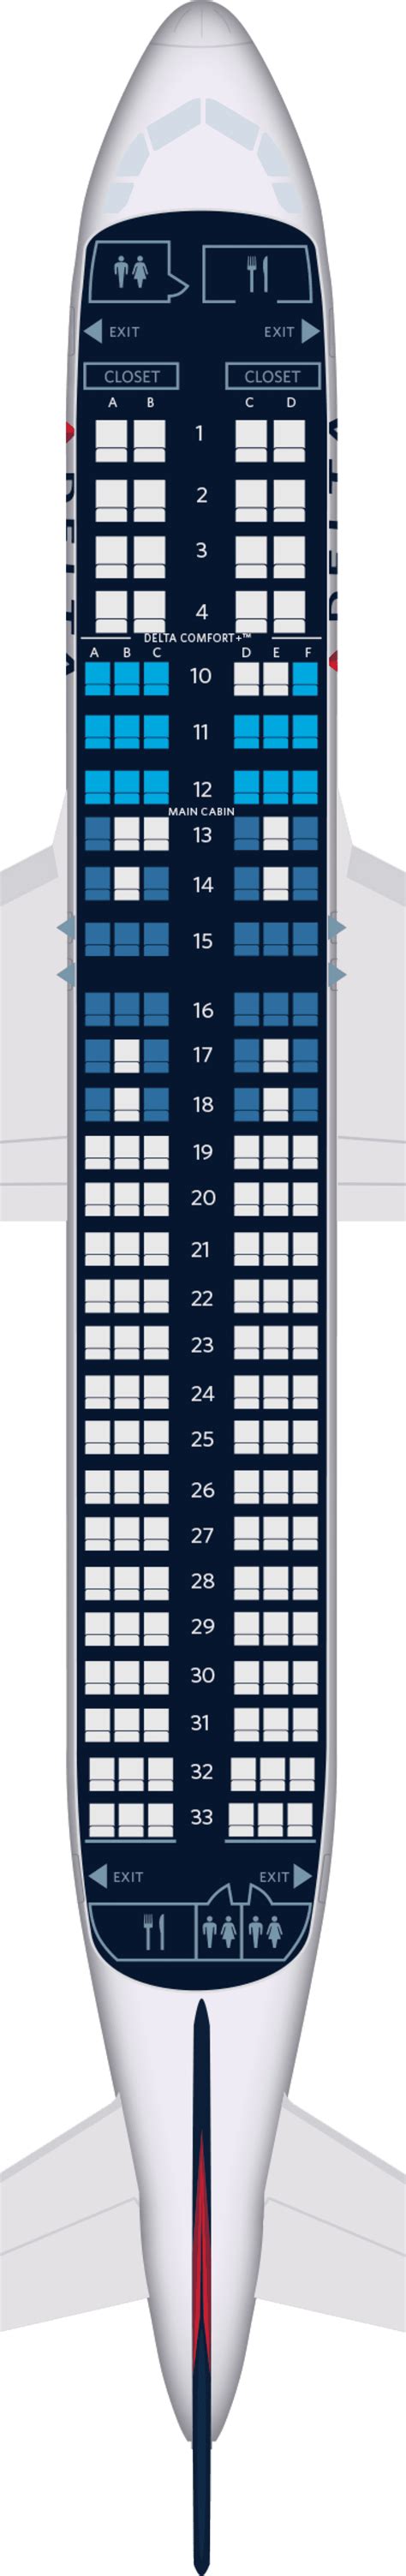 Airbus A Aircraft Seat Maps Specs Amenities